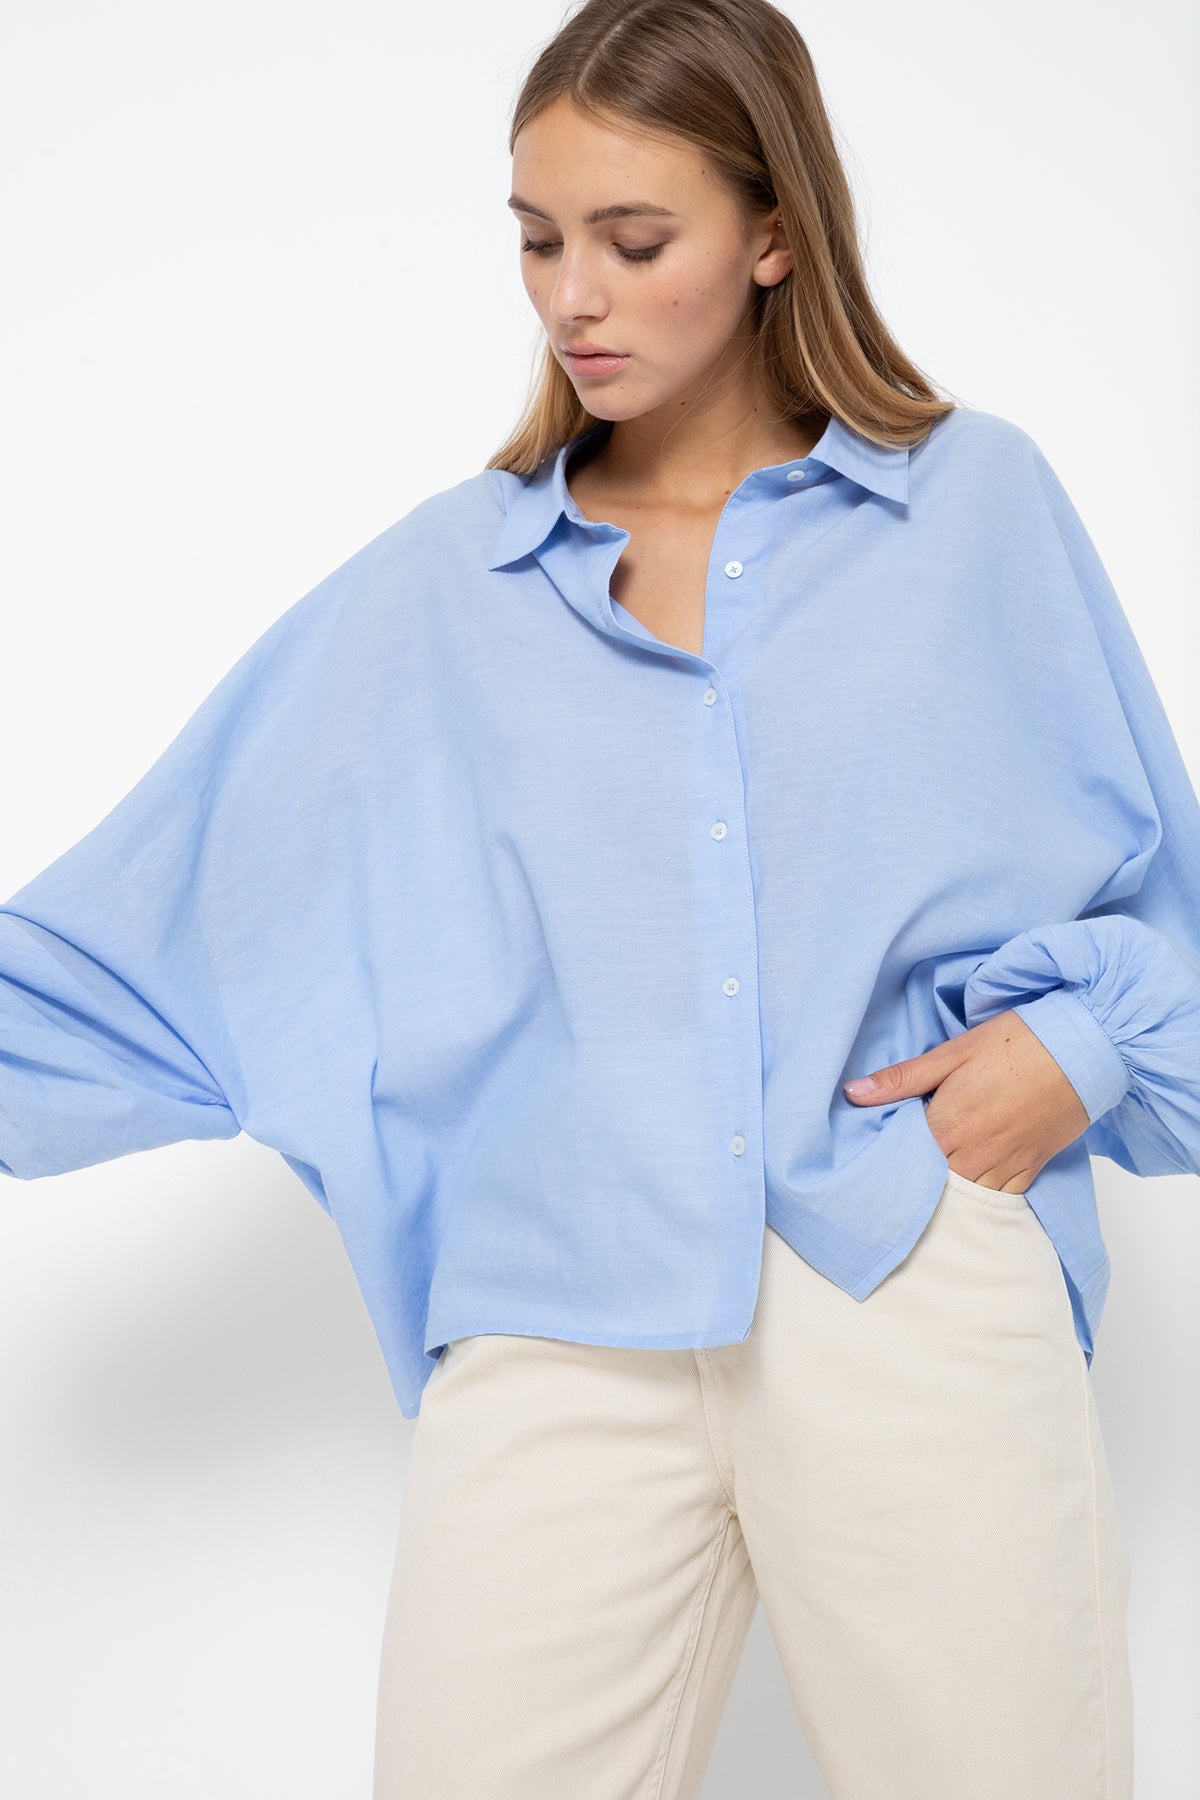 Gala Shirt with Collar & Puff Sleeves | Chambray Blue